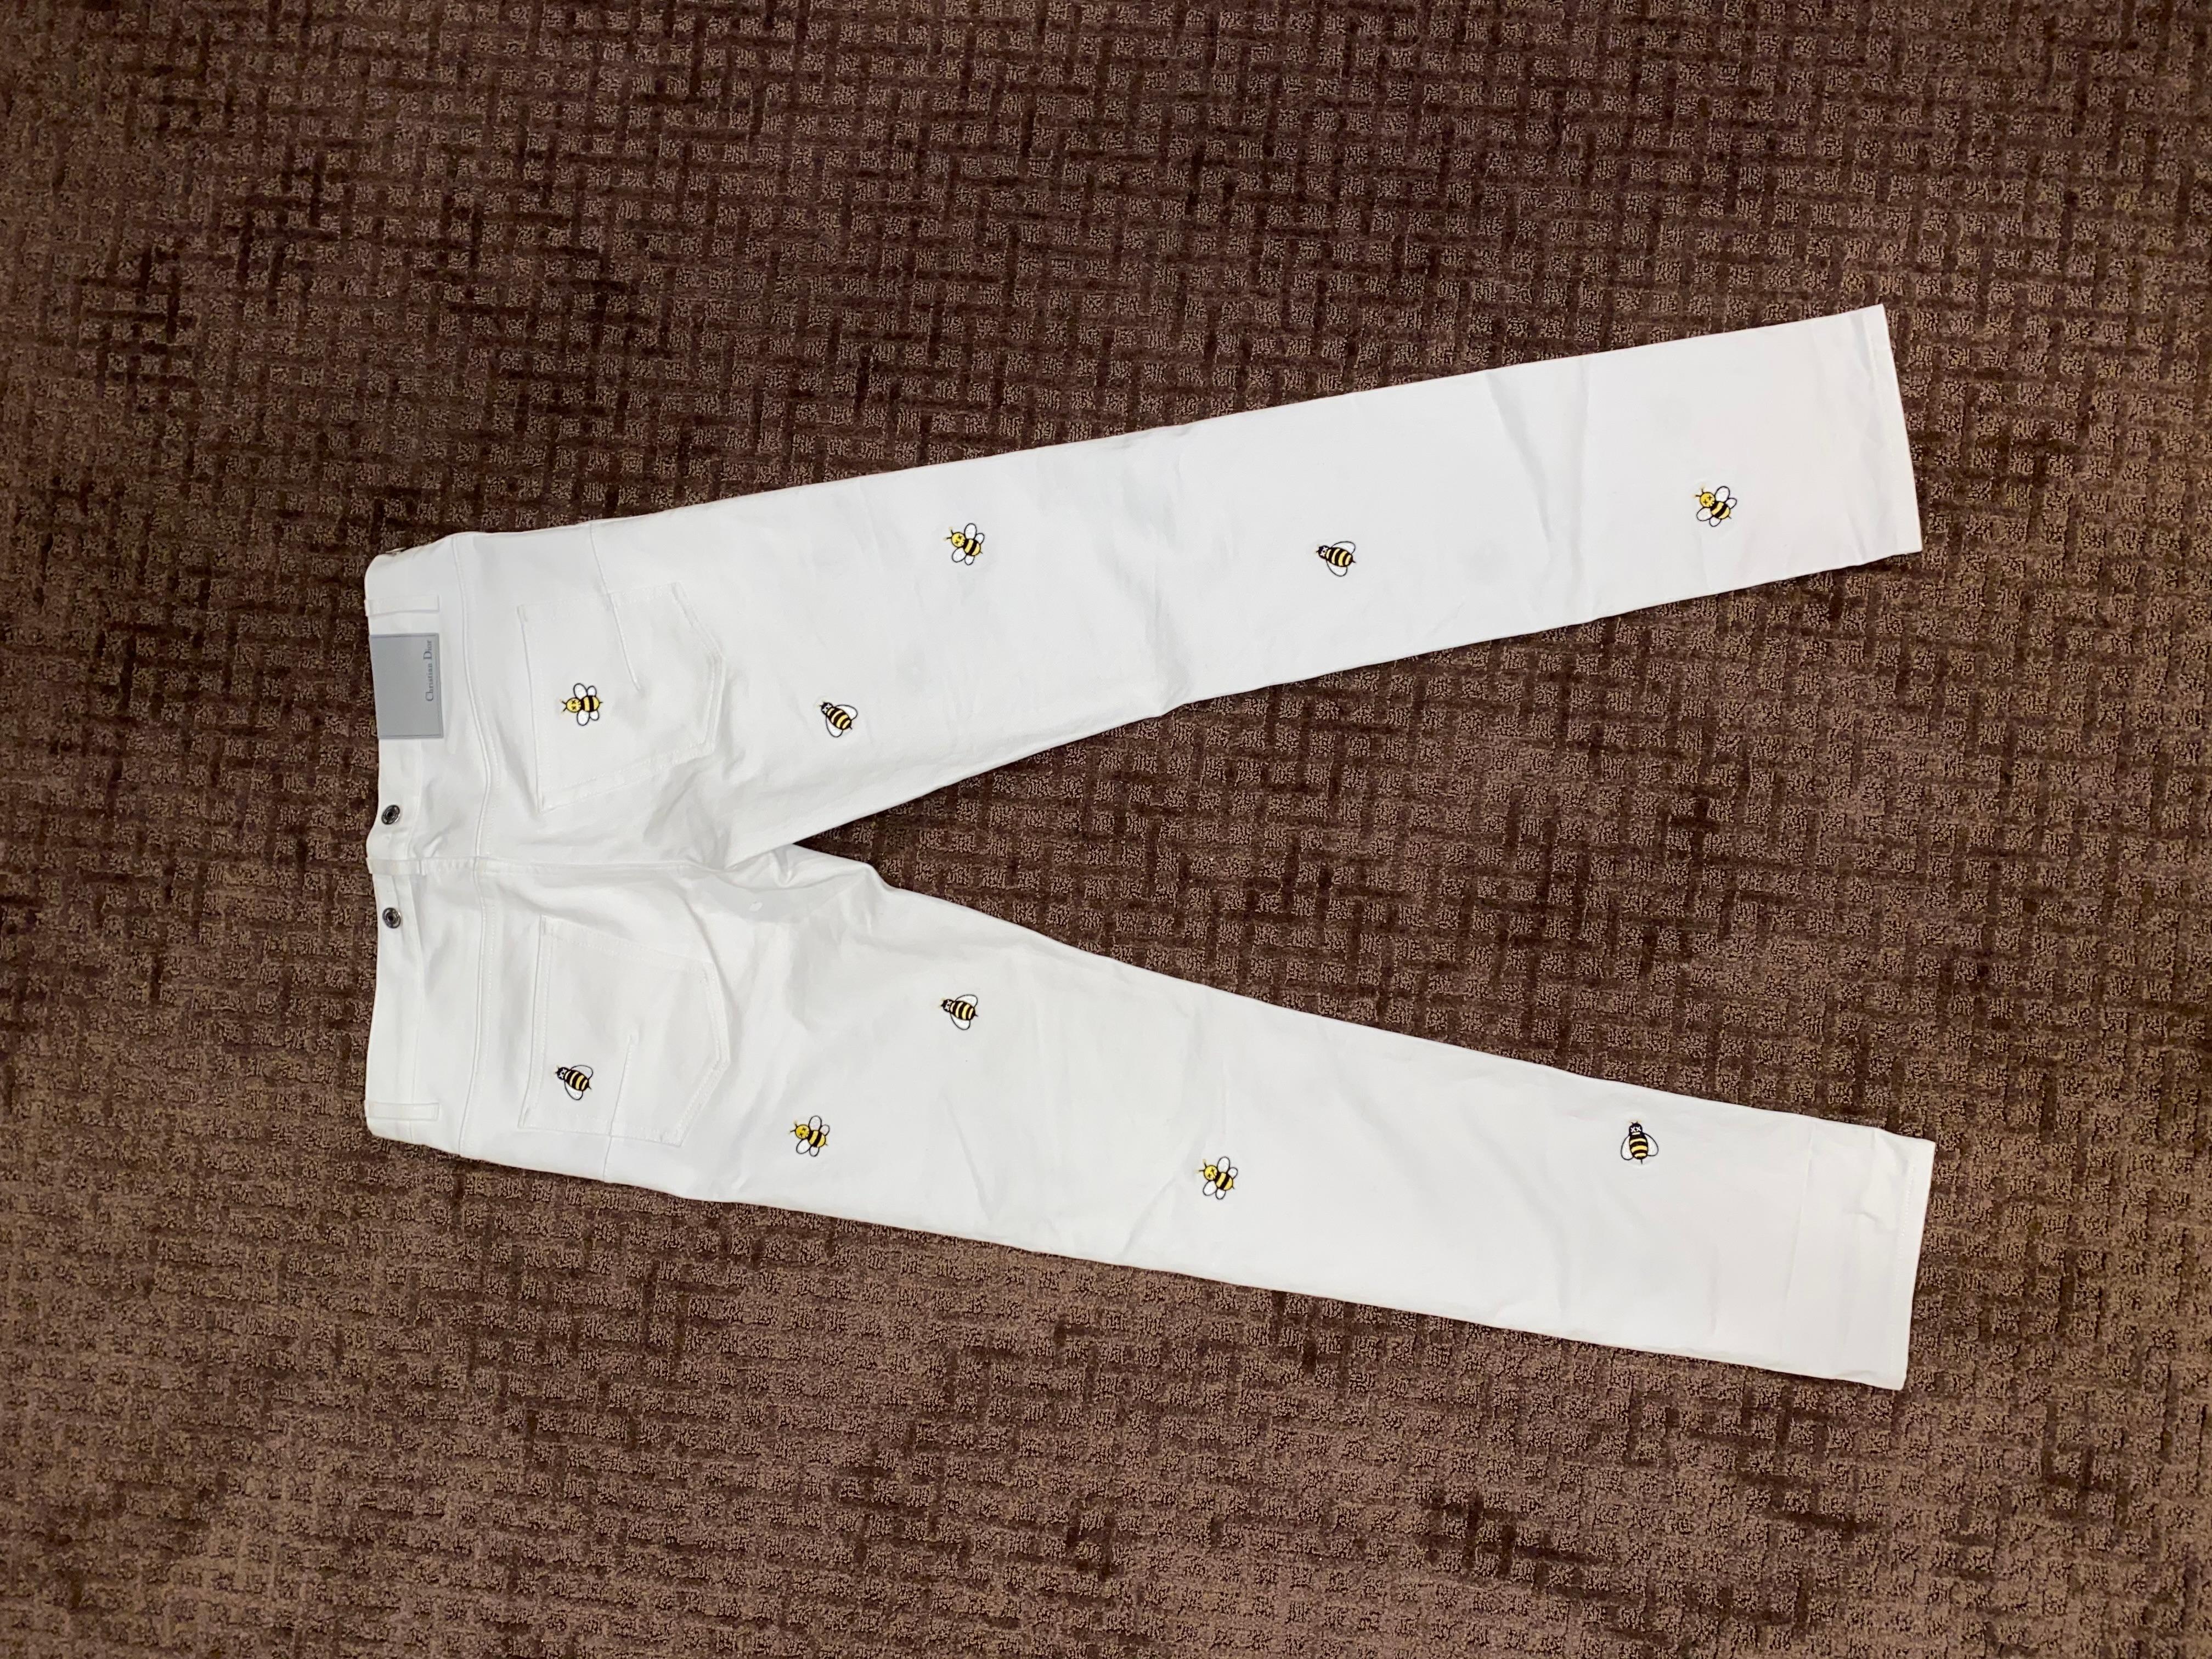 Dior x Kaws white denim pants
Size 32
Excellent condition (worn x1)
Kim Jones first collection with artist kaws

Retail price was $1800+tax
Sold out and very sough after piece. Cannot find this anywhere. Only pair on the net.


Measurements:
Waist: